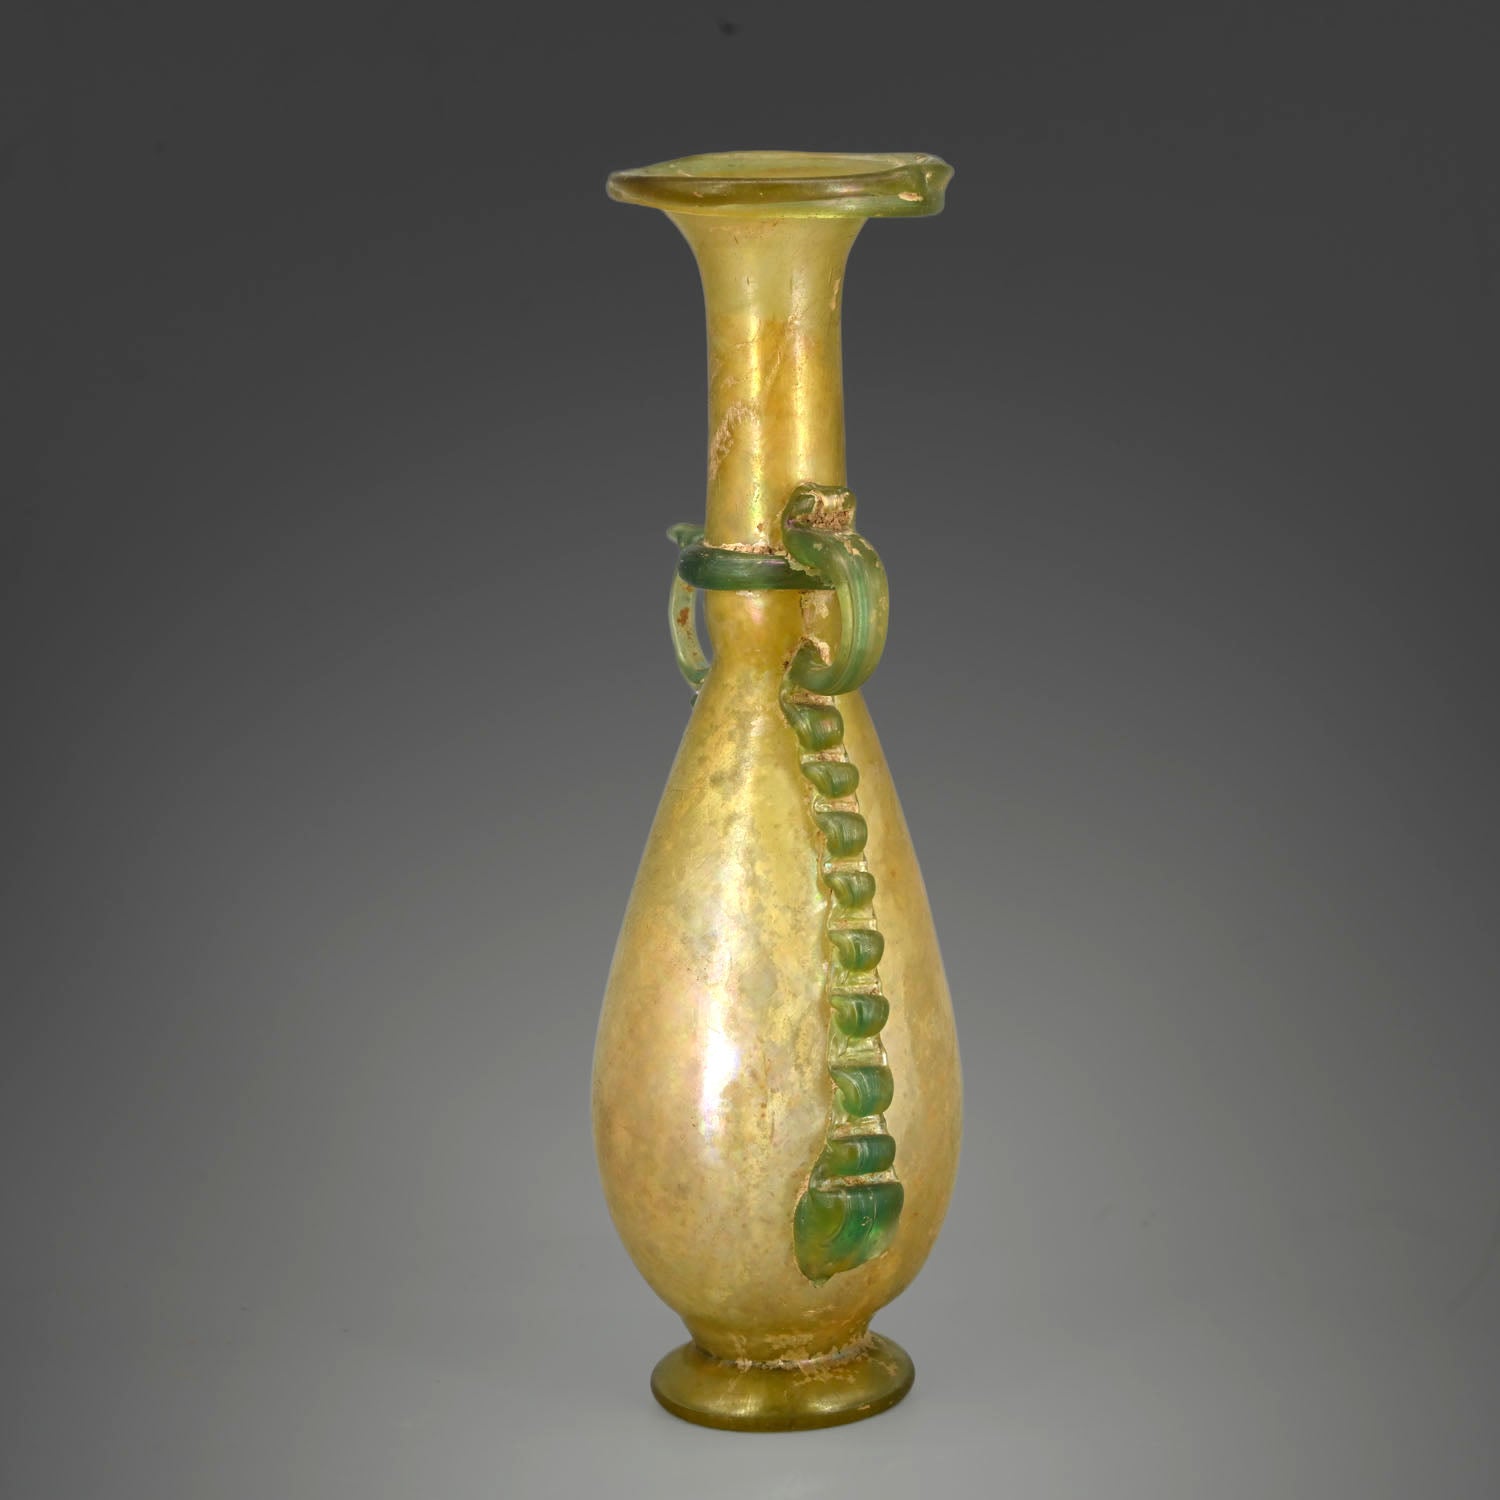 A fine Roman iridescent green/amber glass Amphoriskos, Late Imperial or Early Byzantine, ca. 3rd - 4th century CE